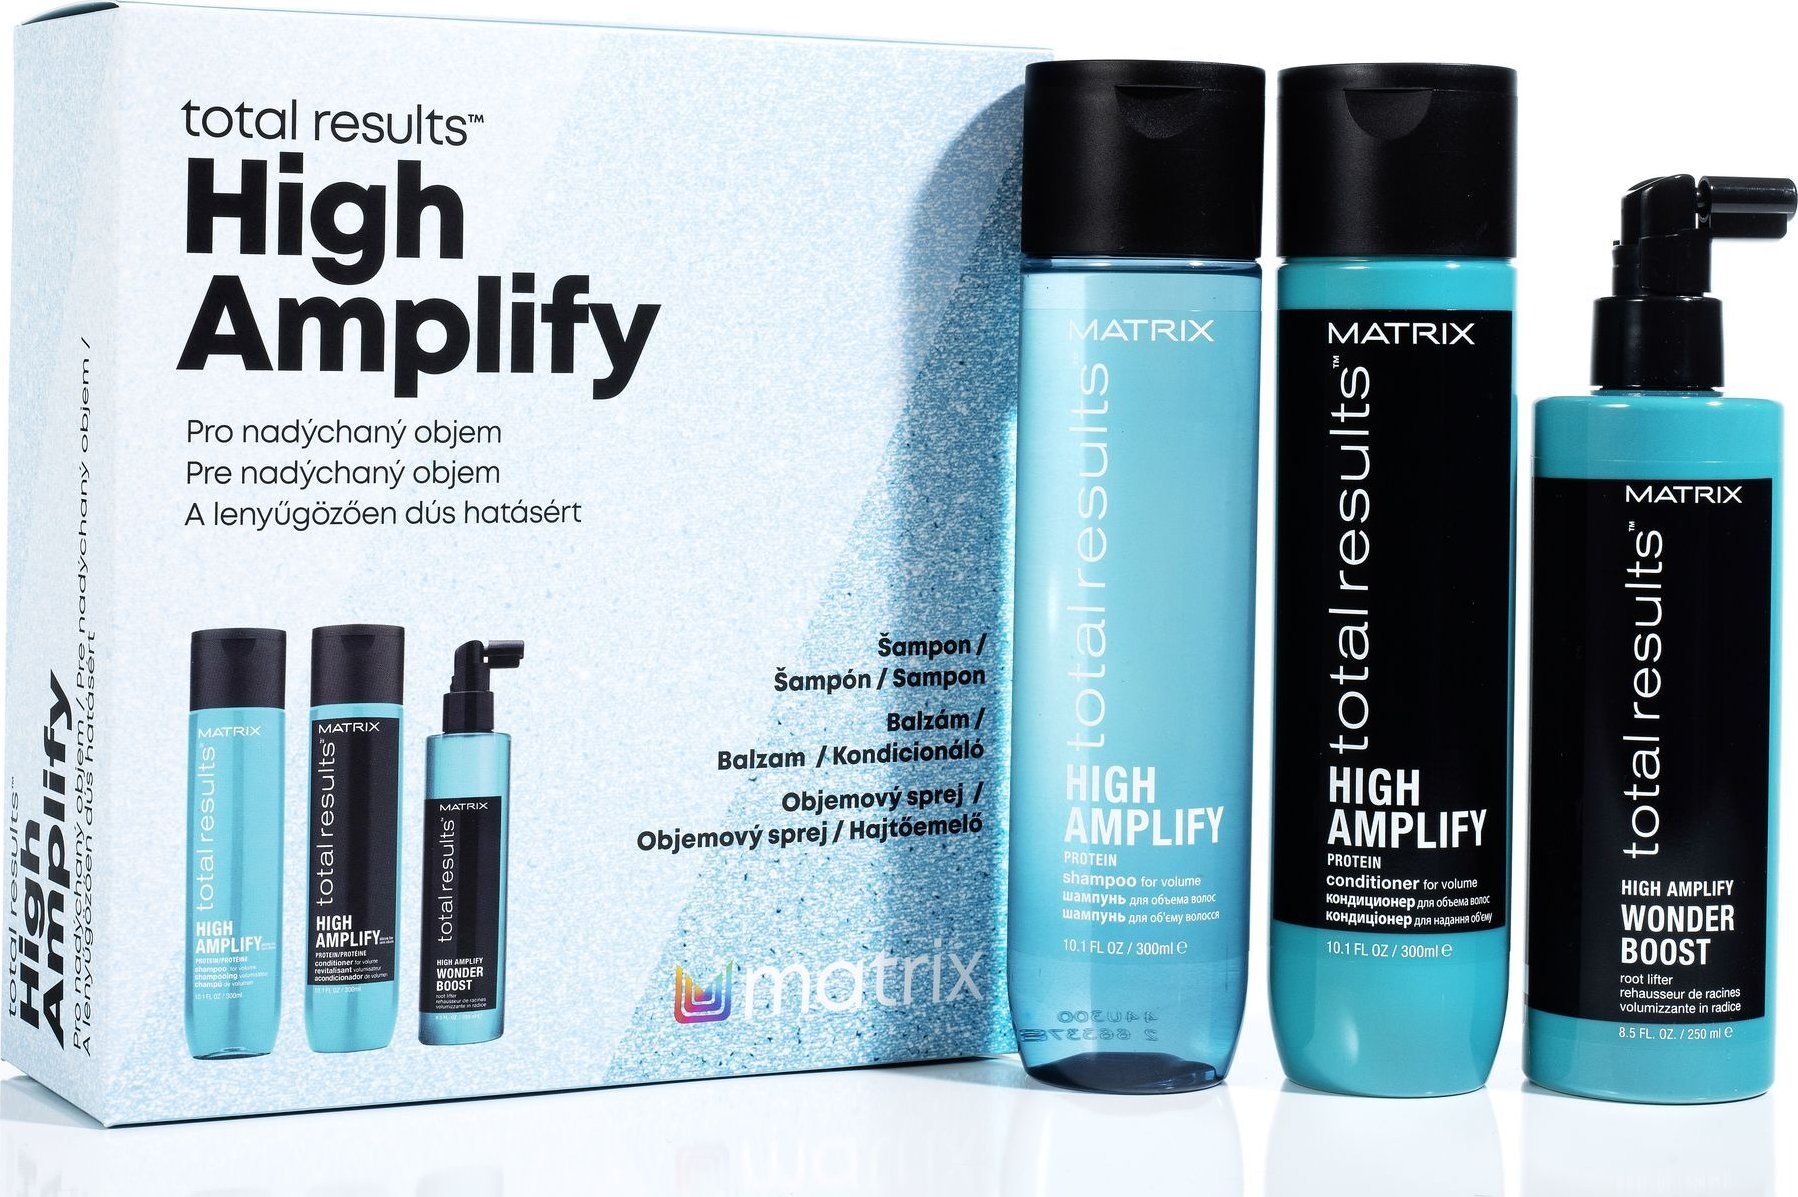 Matrix Total Results High Amplify Conditioner - wide 2